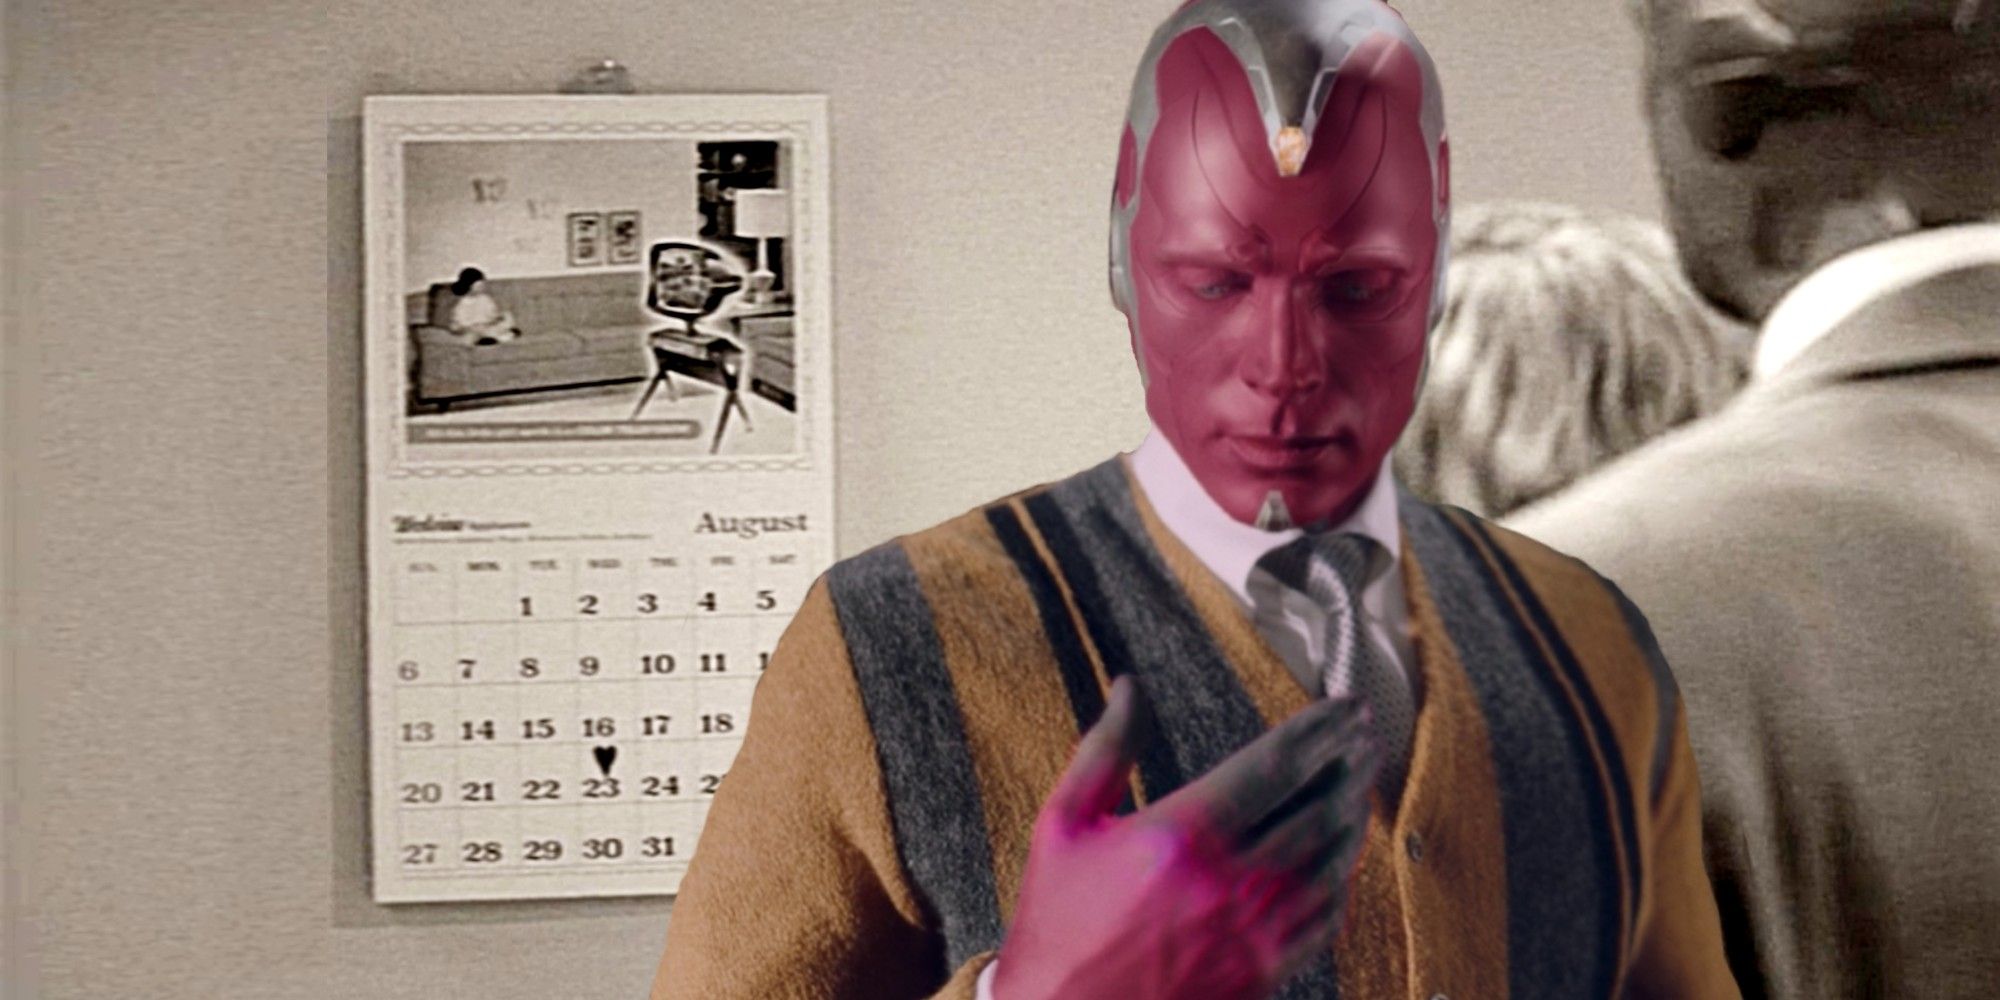 WandaVision's August 23 Date Is A Big Comic Clue To Vision's Return